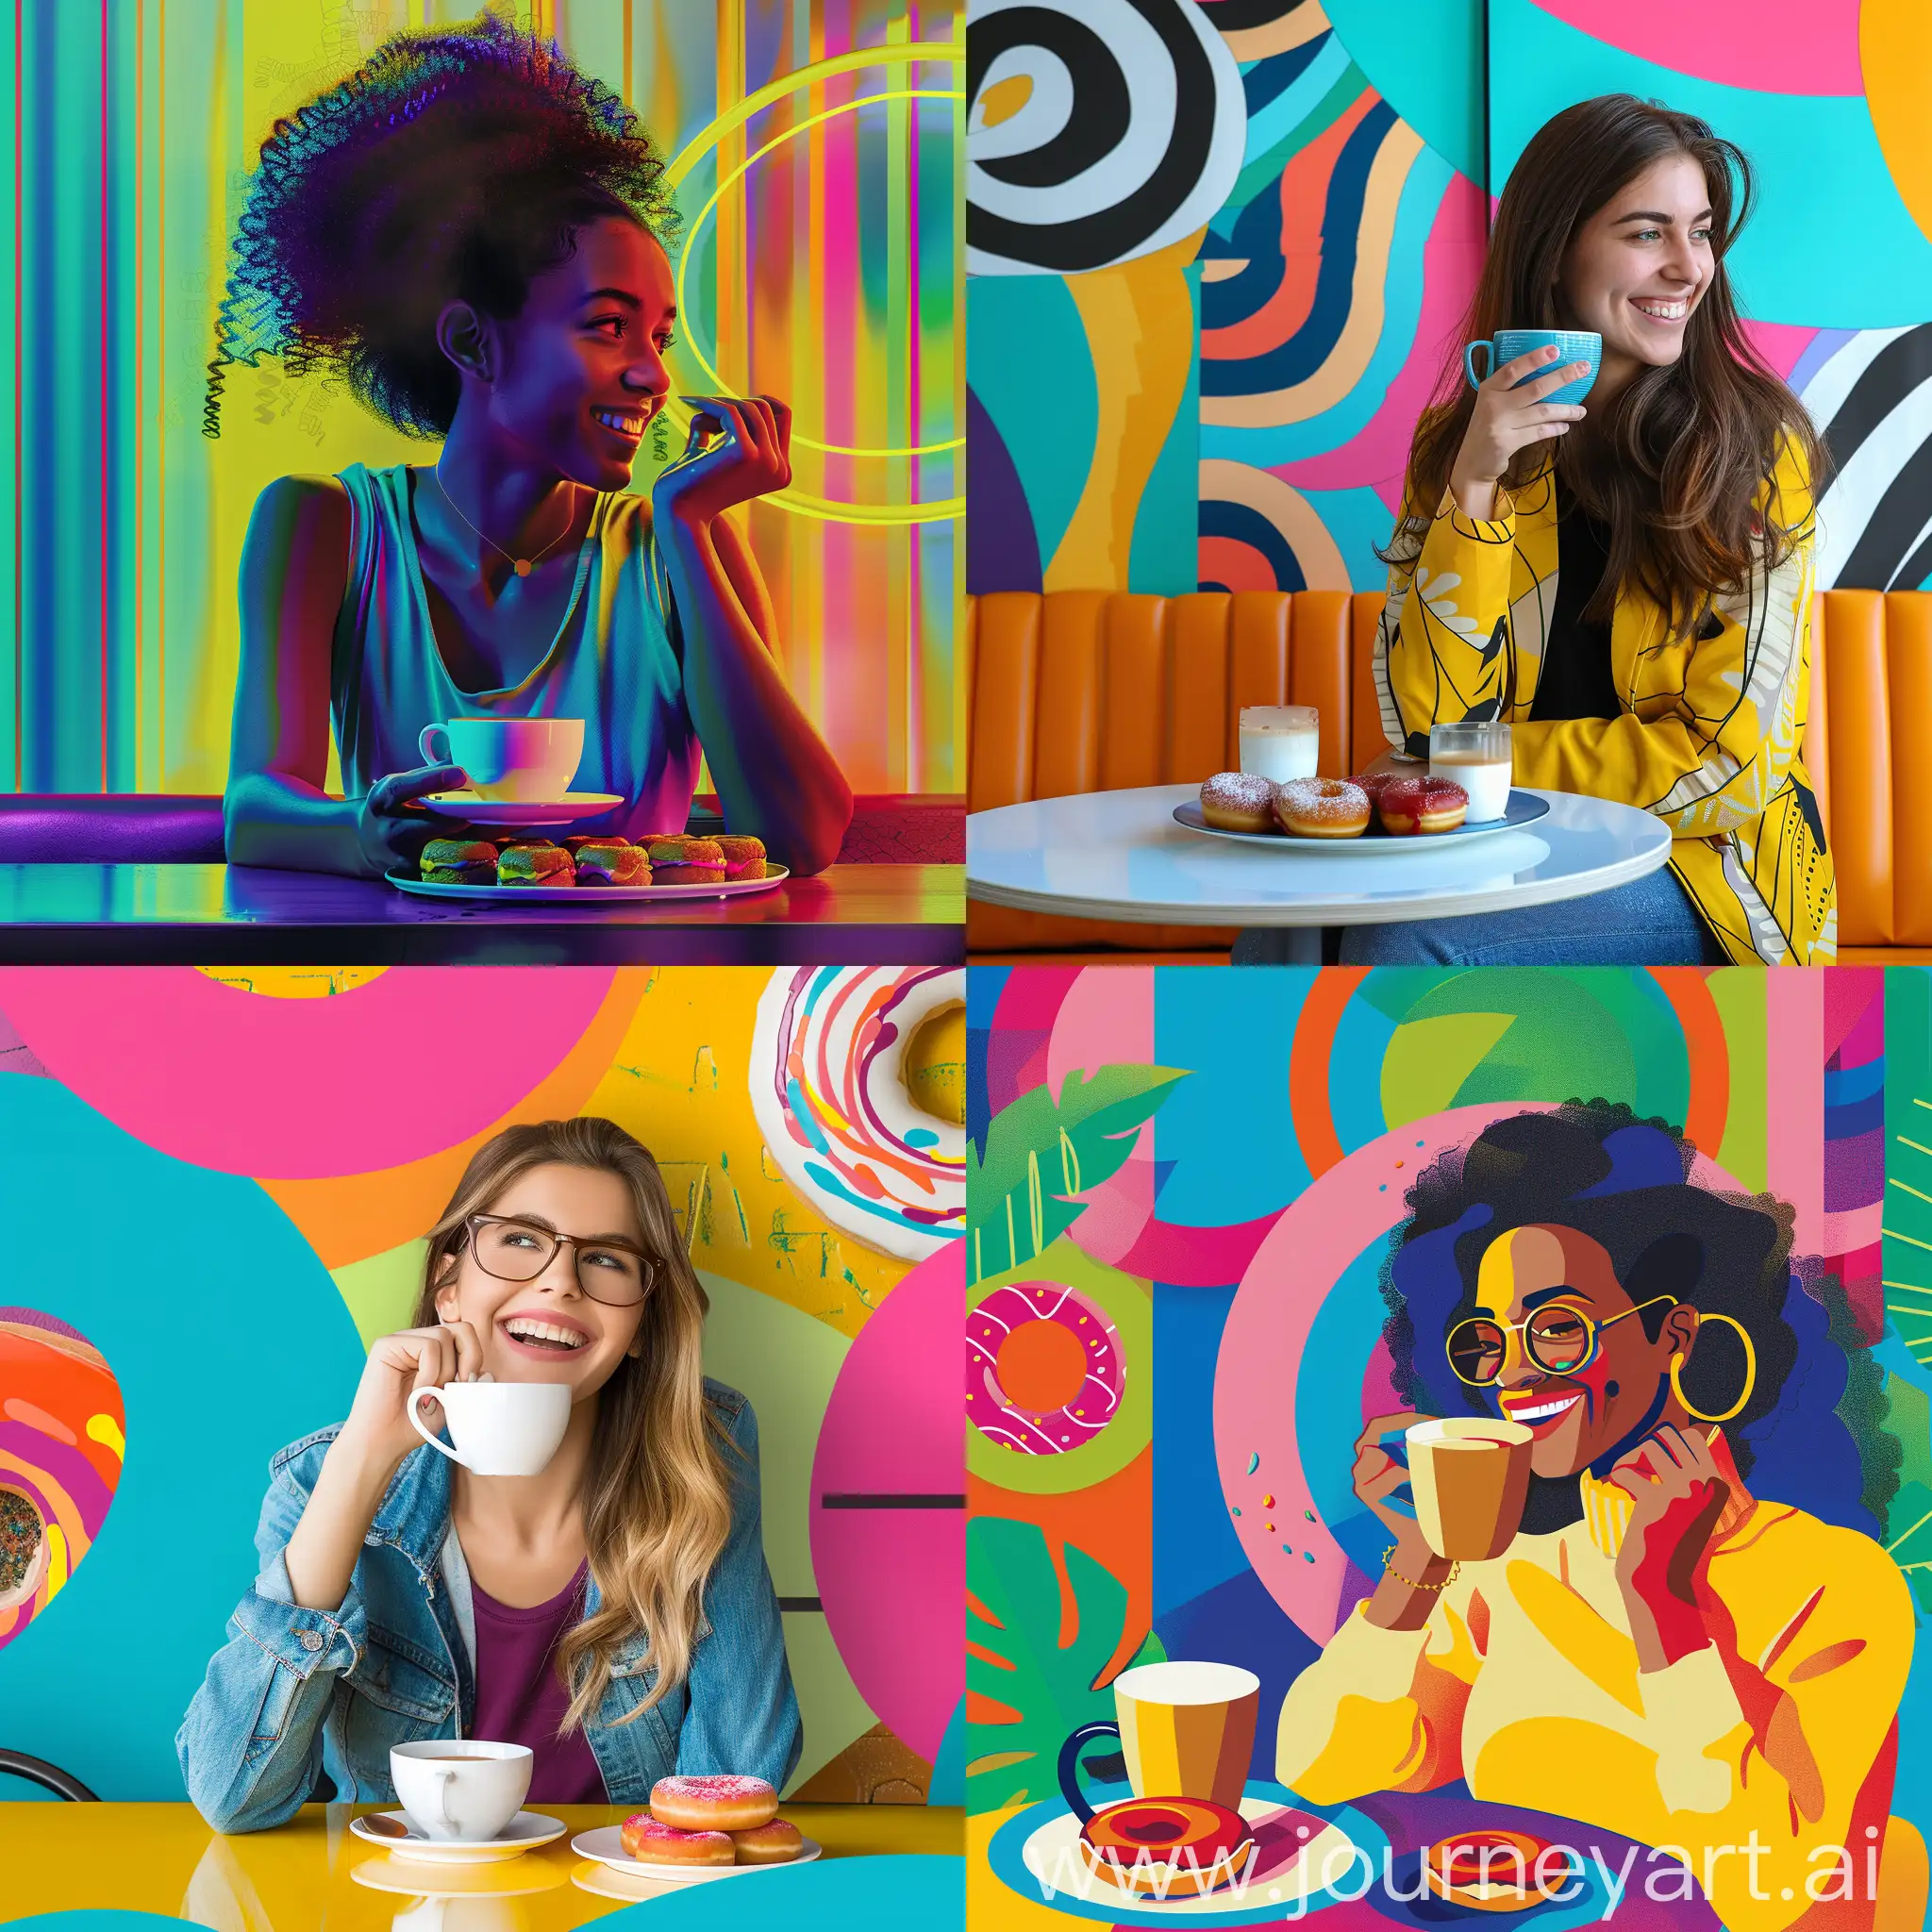 Create a vibrant and modern banner for a coffee shop called "Pulse Coffee." The scene should include a stylish, smiling woman enjoying a cup of coffee and a plate of appetizing donuts. The background should be lively with bright colors like electric blue, lime green, and vibrant orange, reflecting the energetic atmosphere of the café. The woman should be seated in a contemporary setting with sleek, modular furniture and neon accents. Ensure the coffee and donuts look delicious and inviting. The overall mood should be dynamic and appealing, emphasizing the lively and modern vibe of Pulse Coffee.